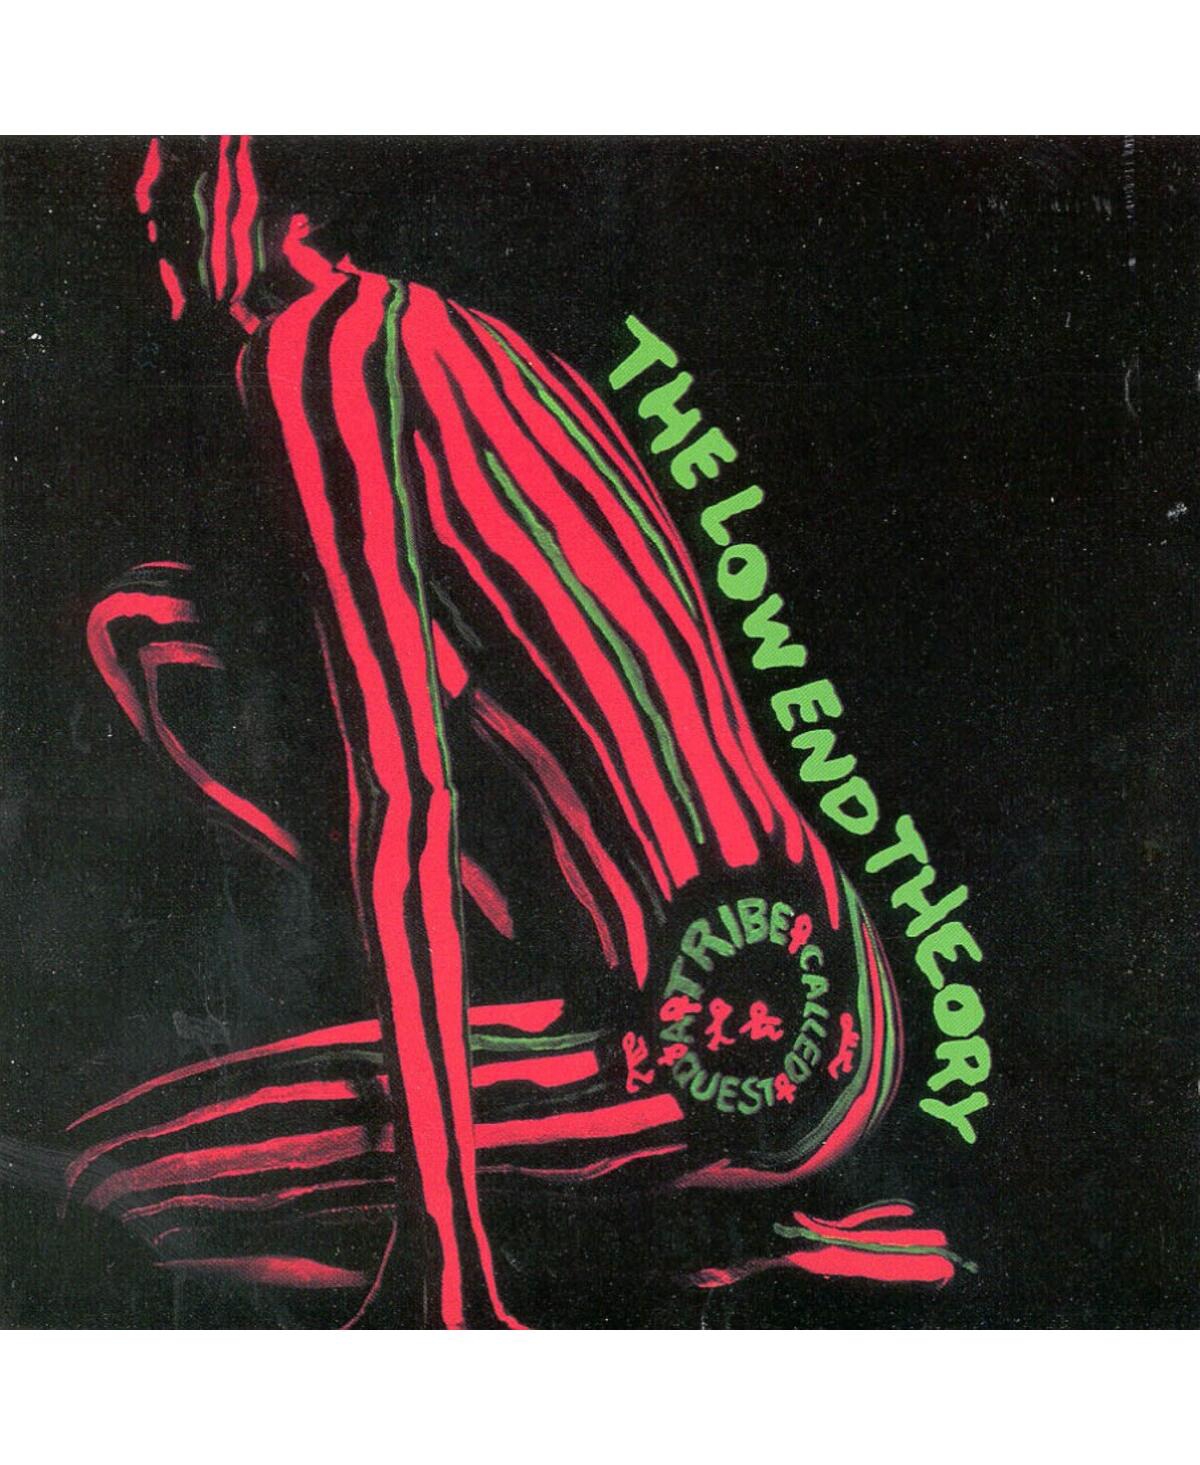 A Tribe Called Quest - The Low End Theory Vinyl 2LP - Explicit - Multi